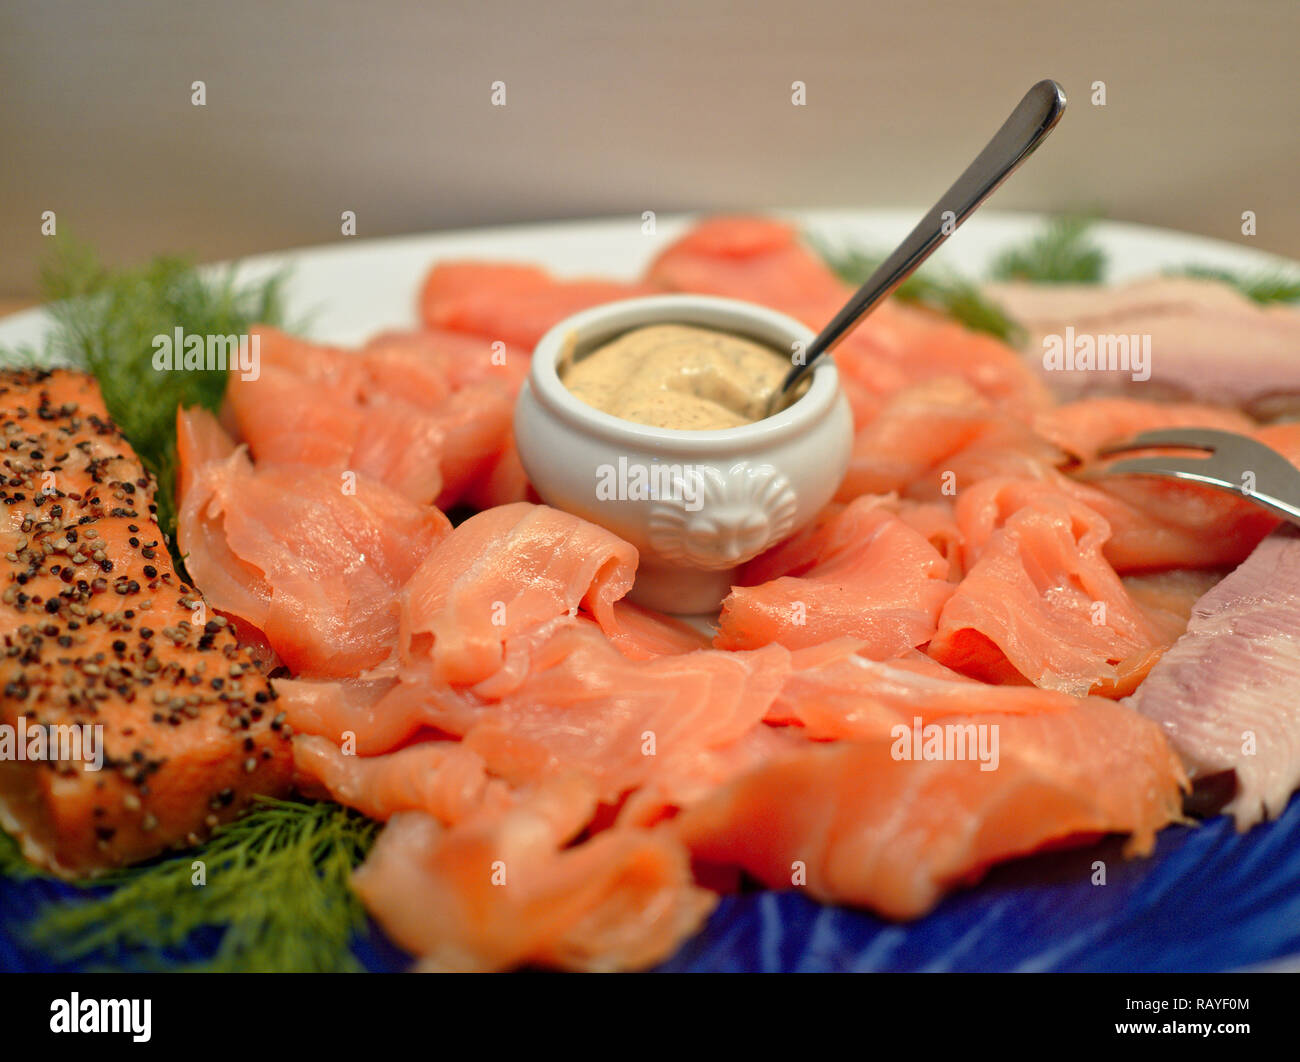 Slices of smoked salmon arranged on a plate with fried salmon fillet, dill and a small china dish with mustard sauce Stock Photo